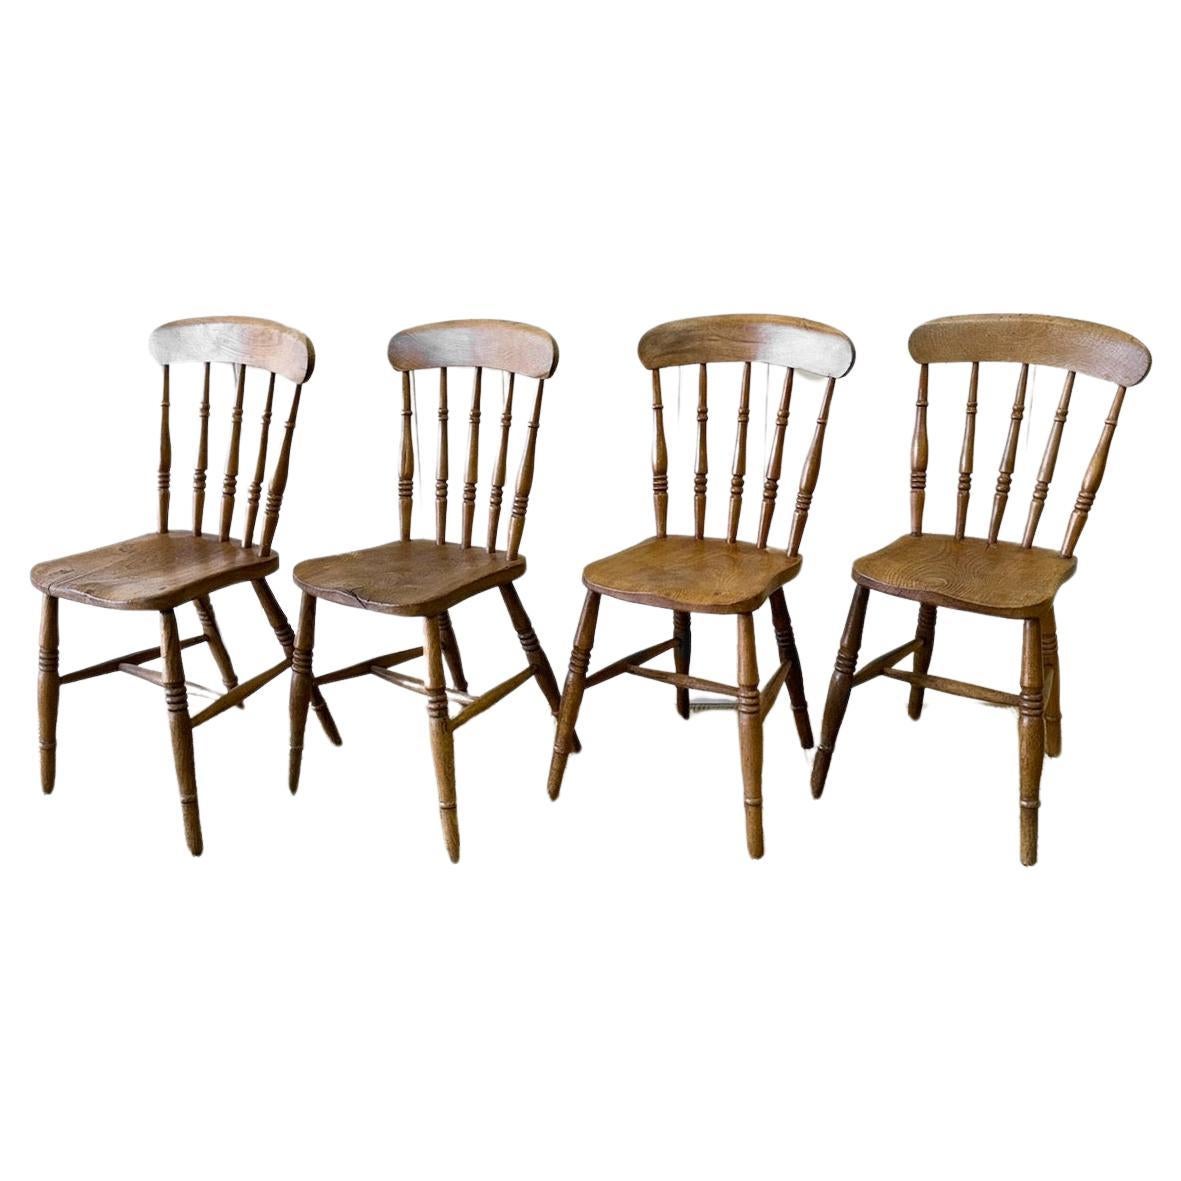 An Antique Set of 4 Spindle Back Chairs For Sale